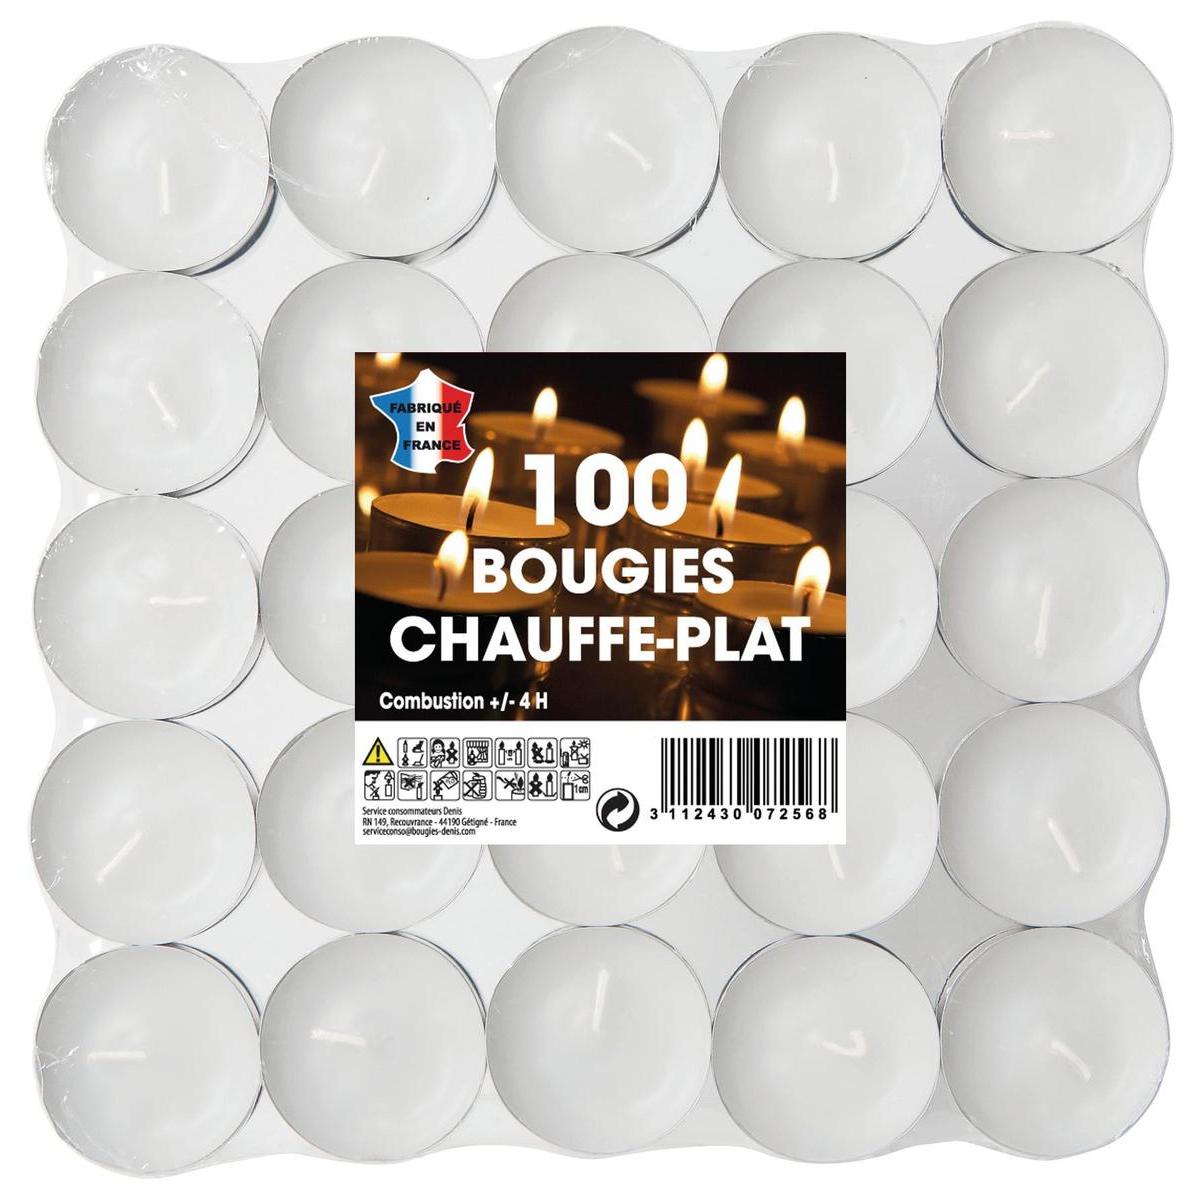 Bougies chauffe-plats blanches paraffinées